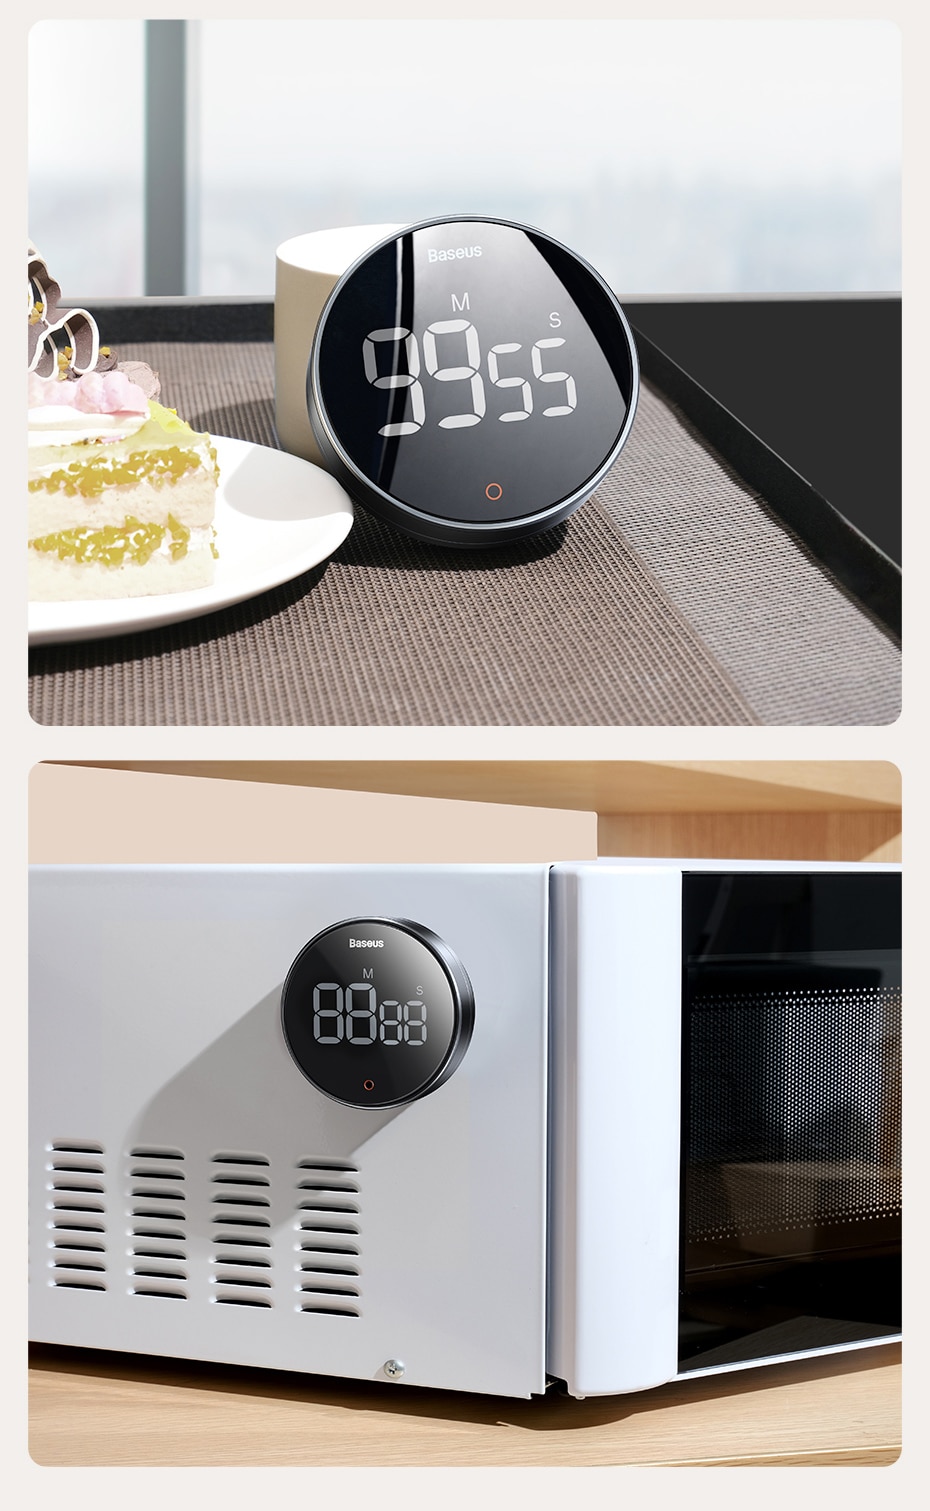 Baseus Magnetic Digital Timers Magnetic Electronic Cooking Countdown Time  Timer LED Digital Kitchen Timer Cooking Shower Study Stopwatch Alarm Clock  Cocina 230328 From Kong09, $19.02